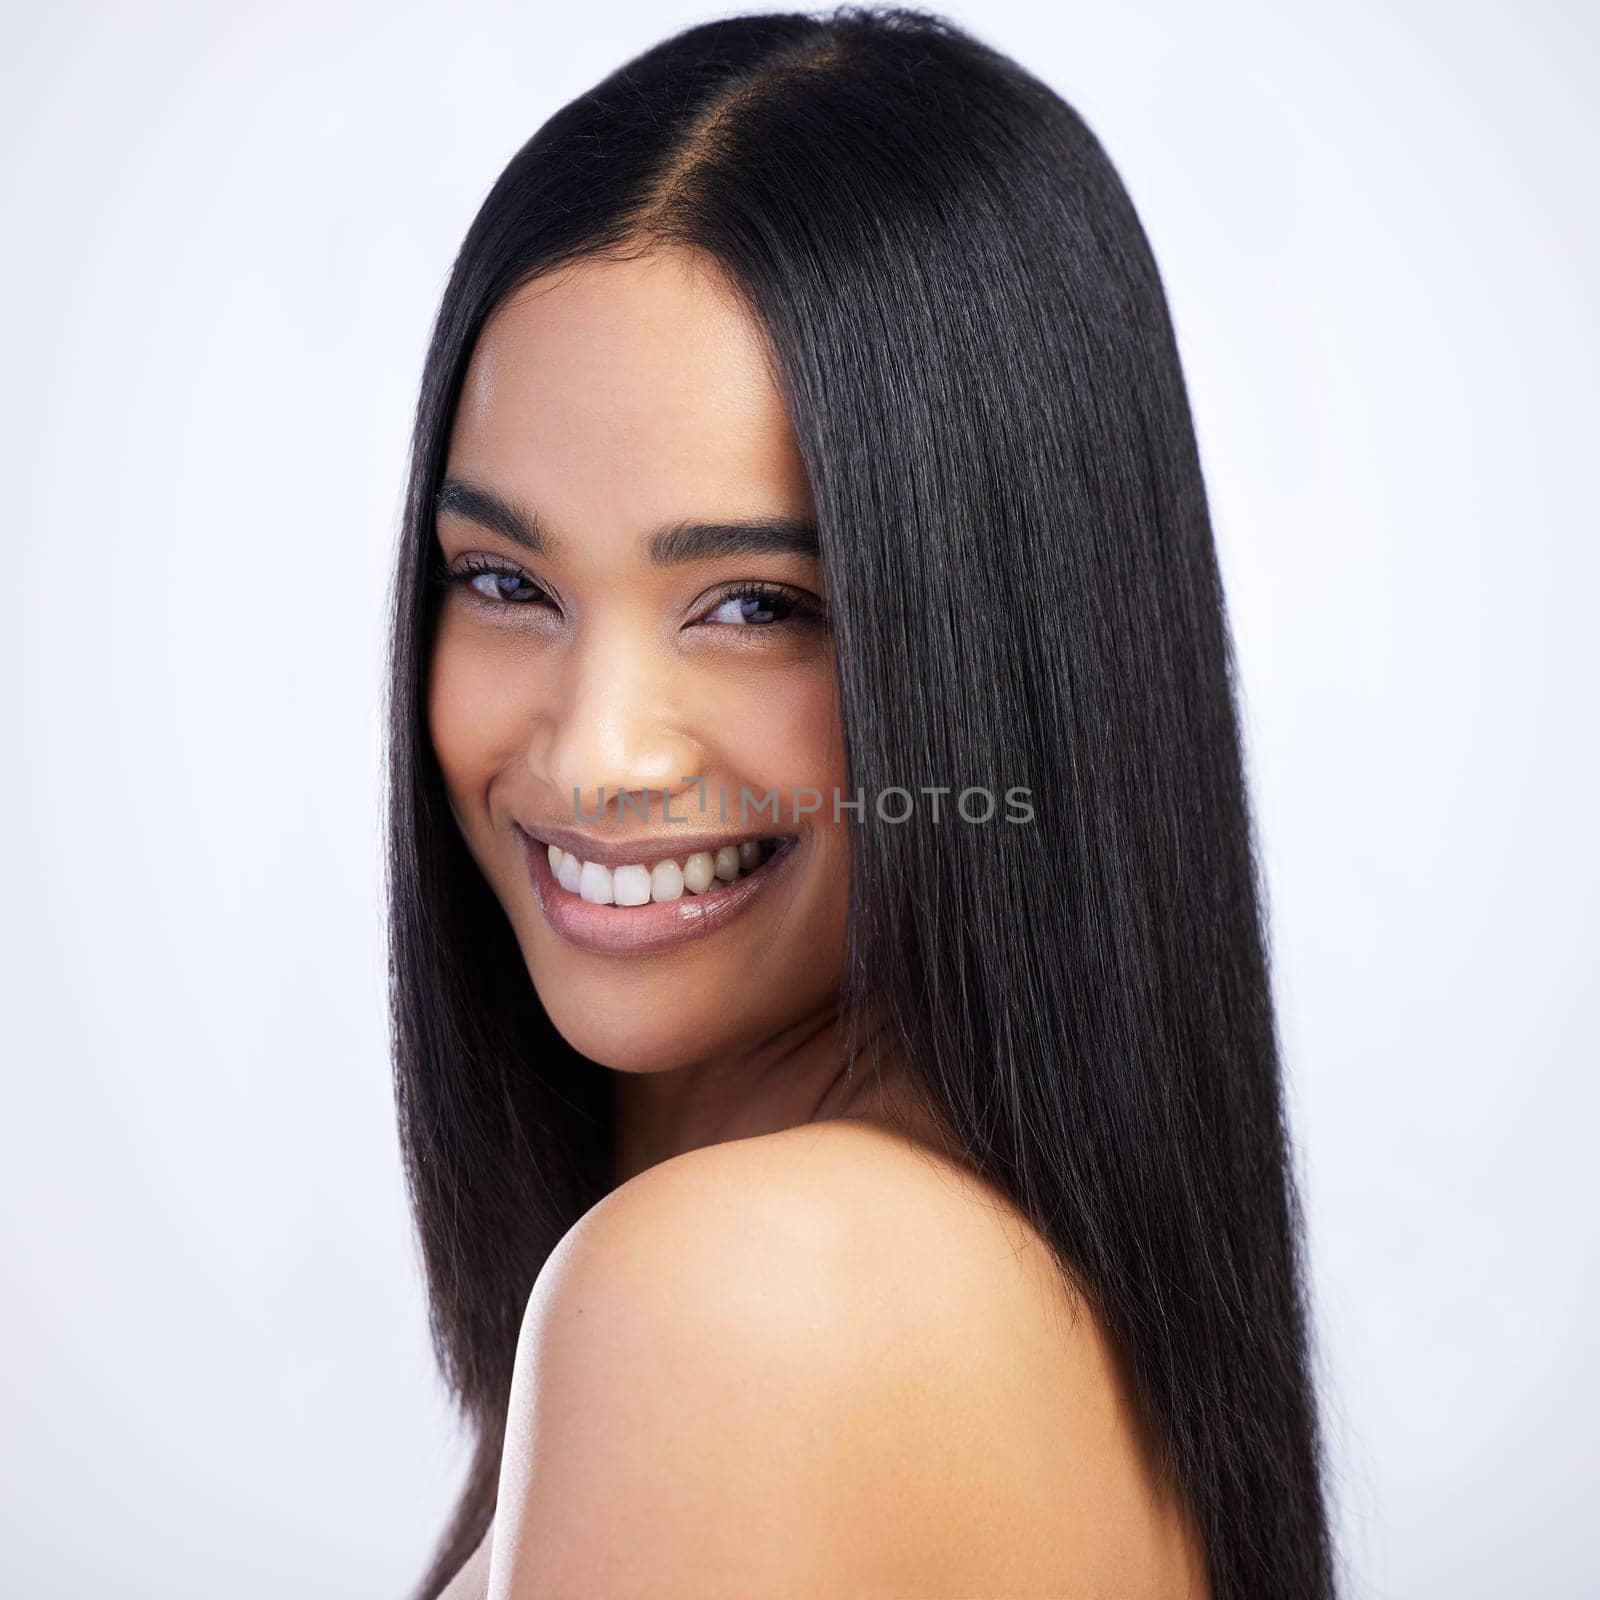 Beauty, face smile and straight hair of woman in studio isolated on a white background for skincare. Portrait, haircare and female model in natural makeup, cosmetics and salon treatment for hairstyle.